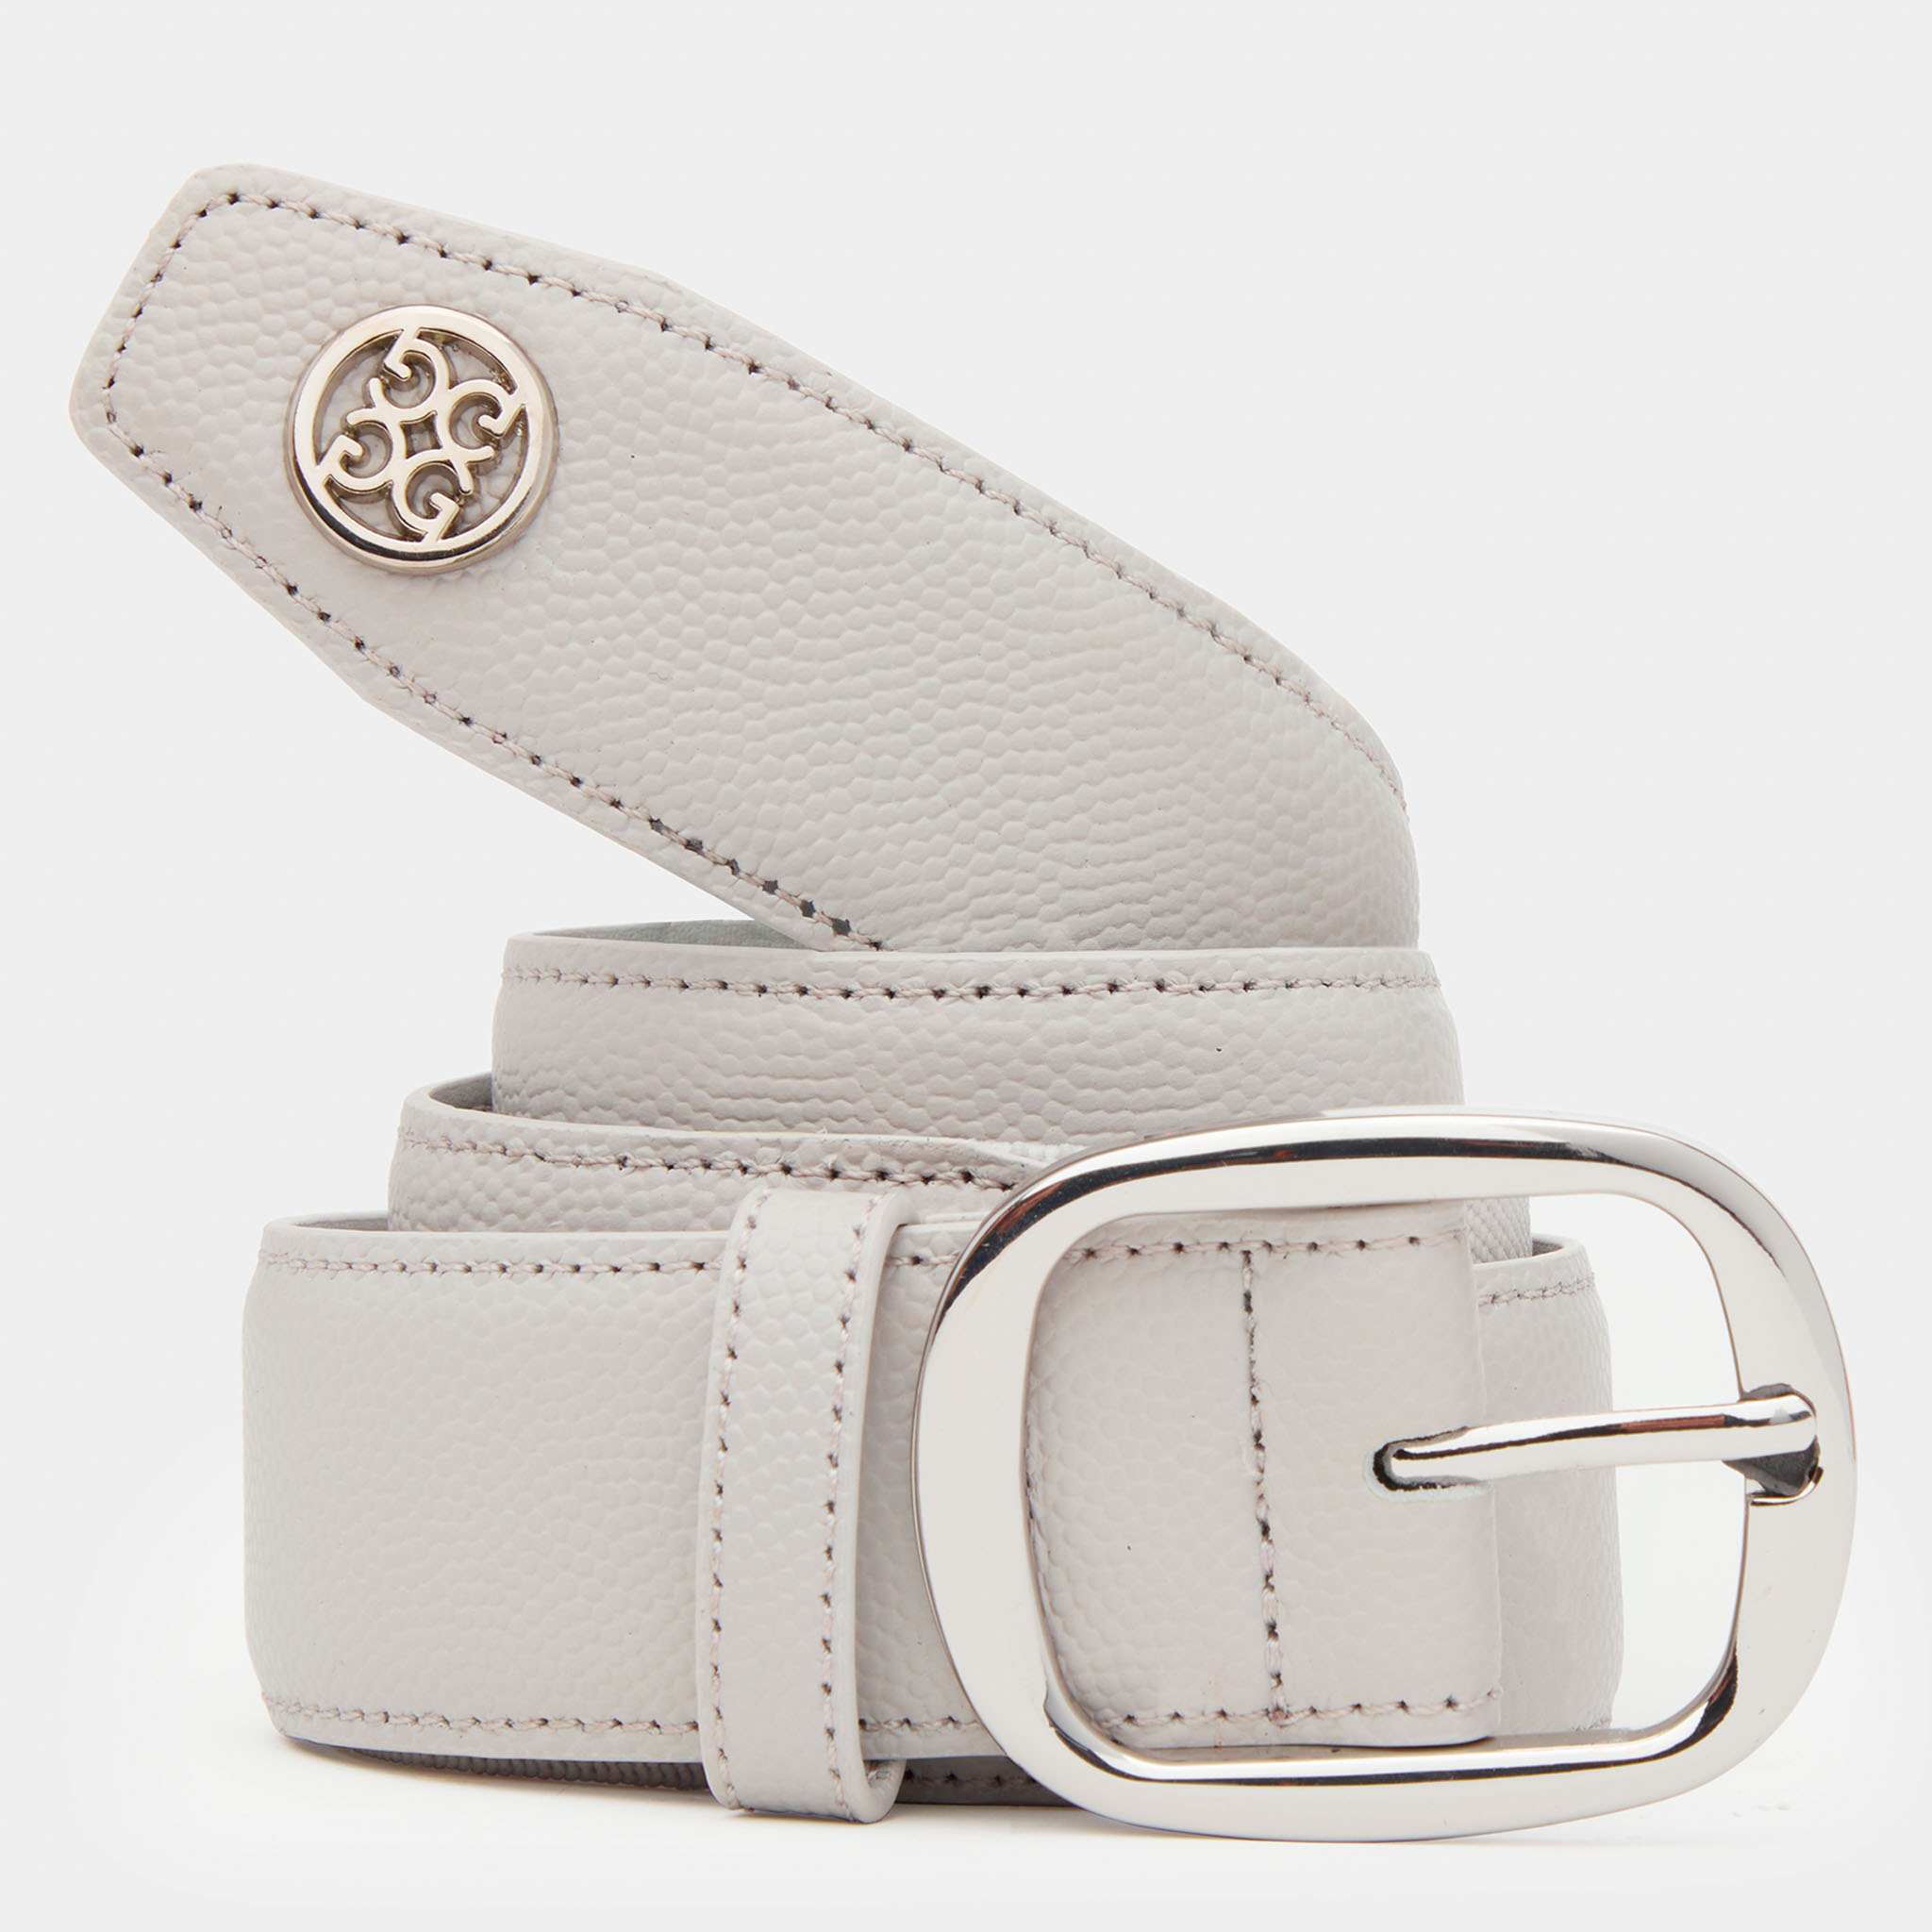 CIRCLE G'S WEBBED BELT | MEN'S ACCESSORIES | G/FORE